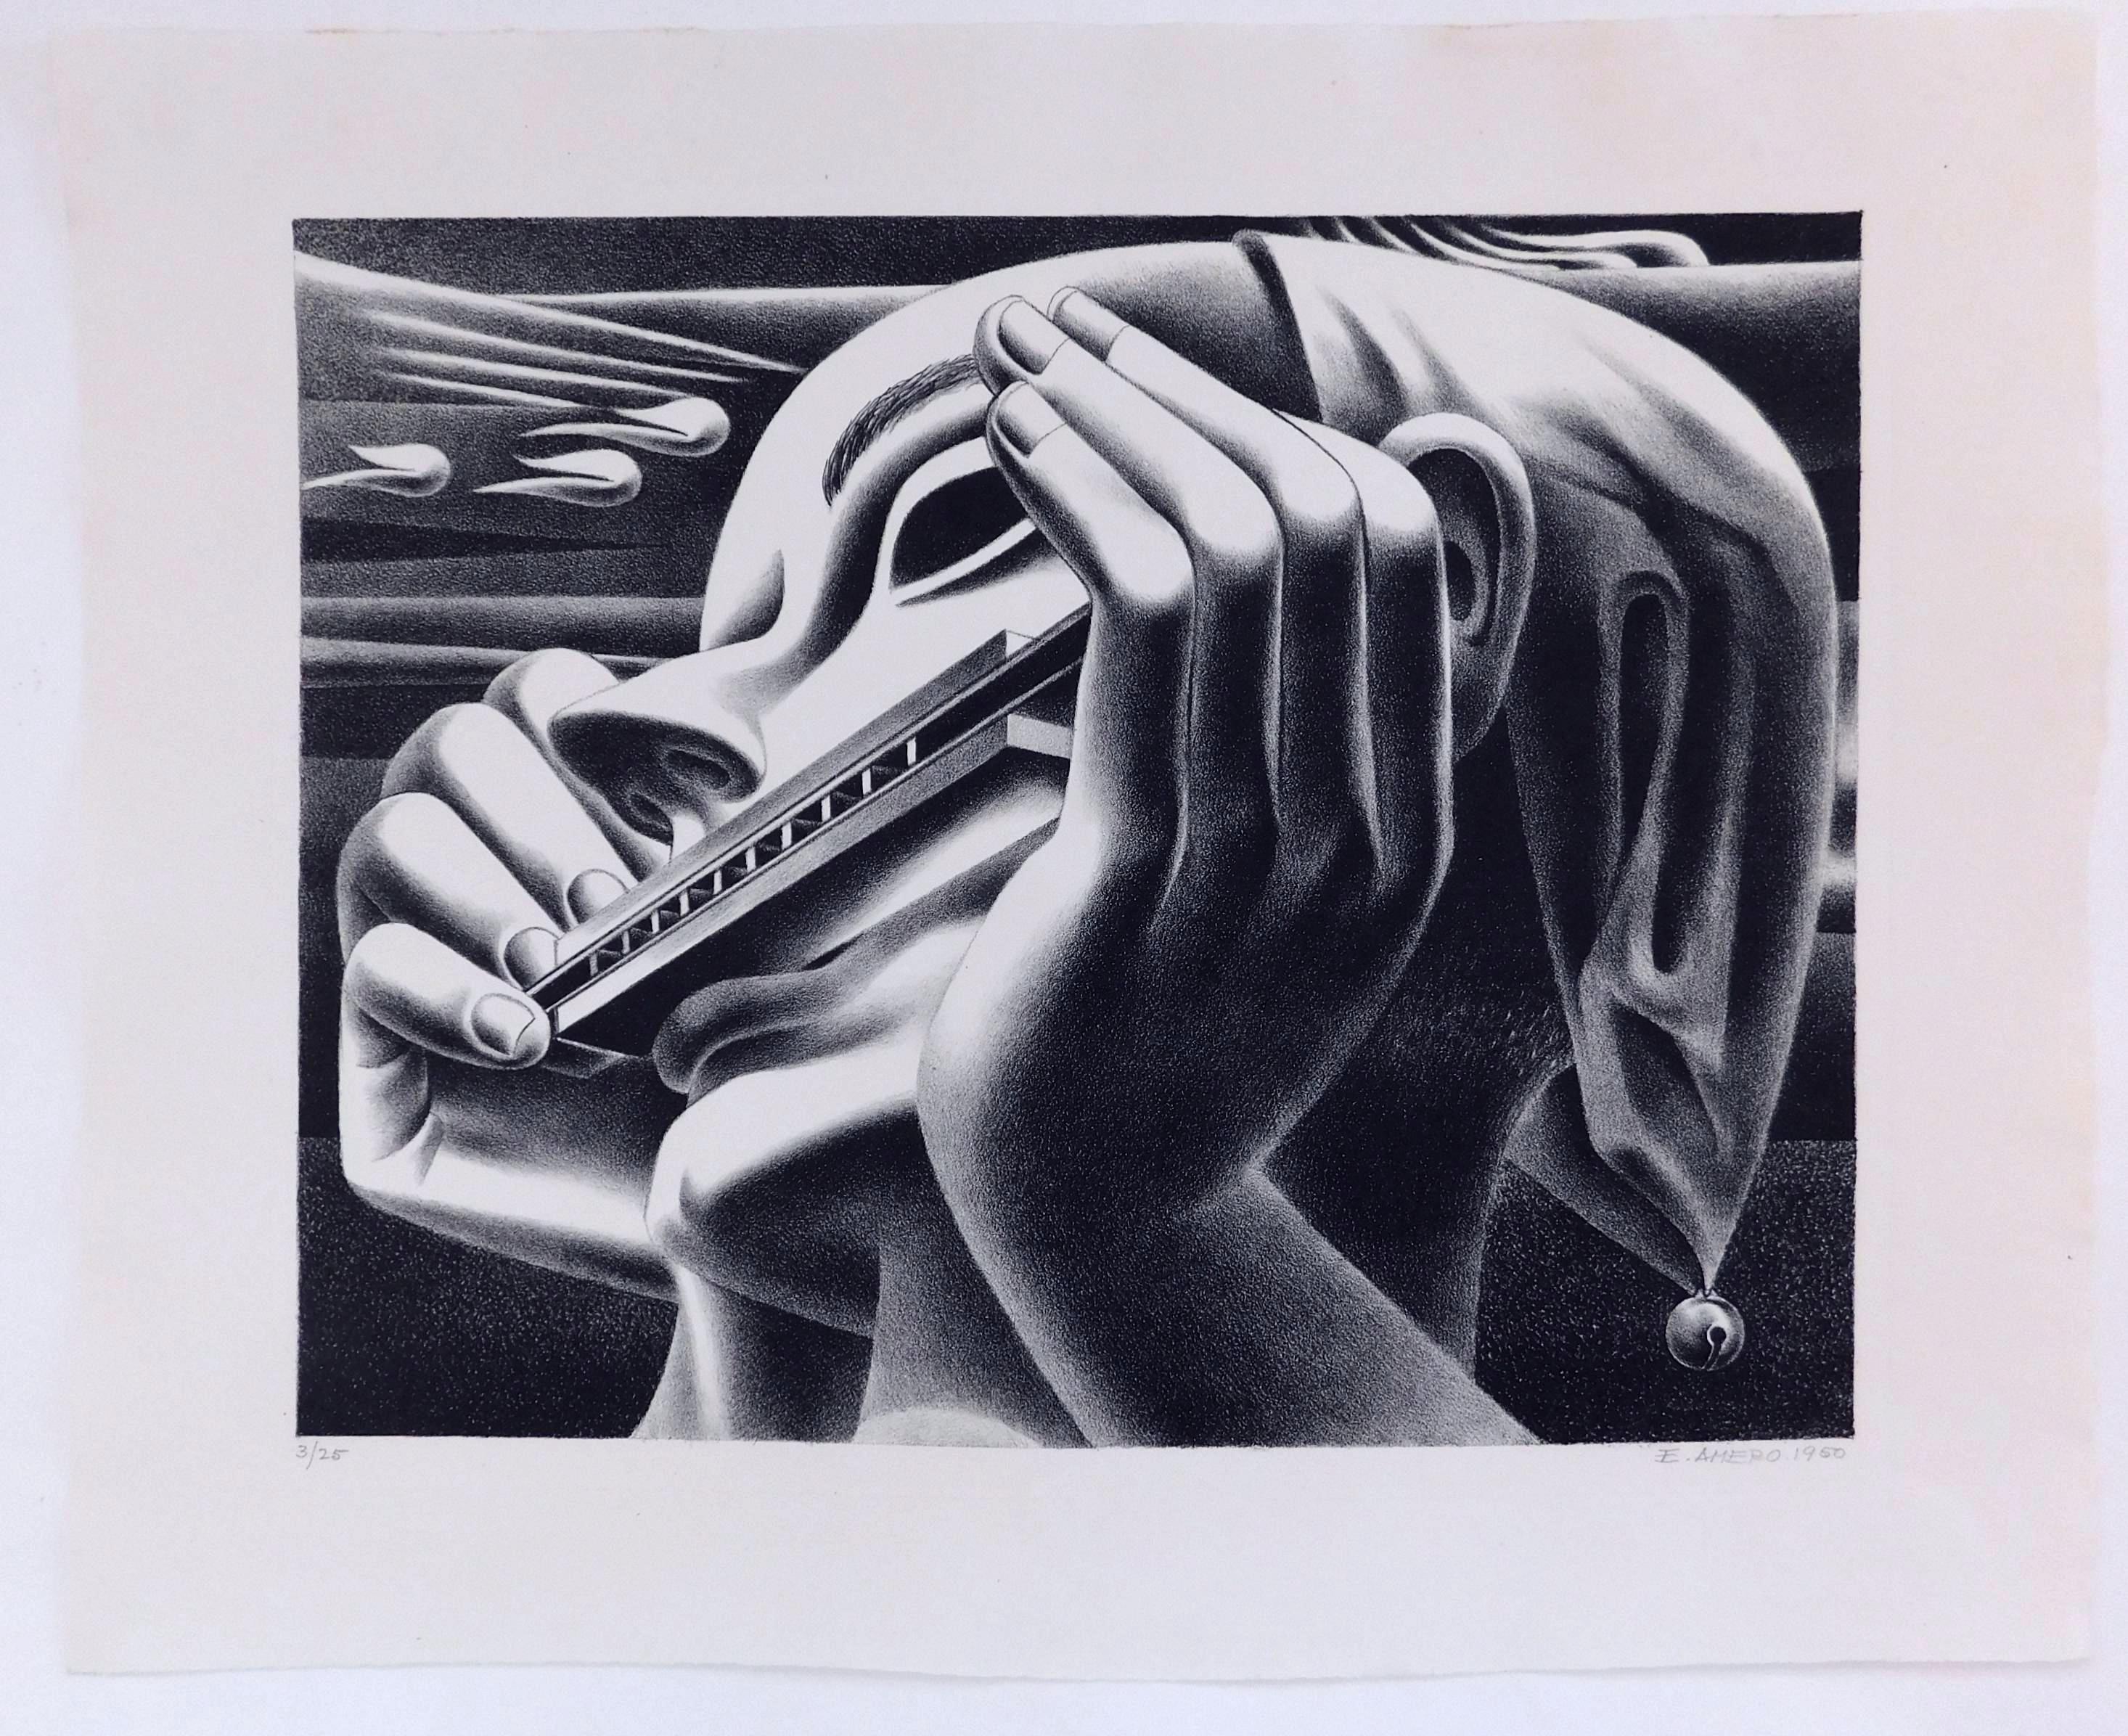 Original lithograph by Mexican artist Emilio Amero (1901 -1976) created 1950.
Titled: “Harmonica Blues.” Edition size is 3 of 25. Signed in pencil lower right. 
In excellent condition. Presents in a 4-ply museum mat. Image size: 9 5/8